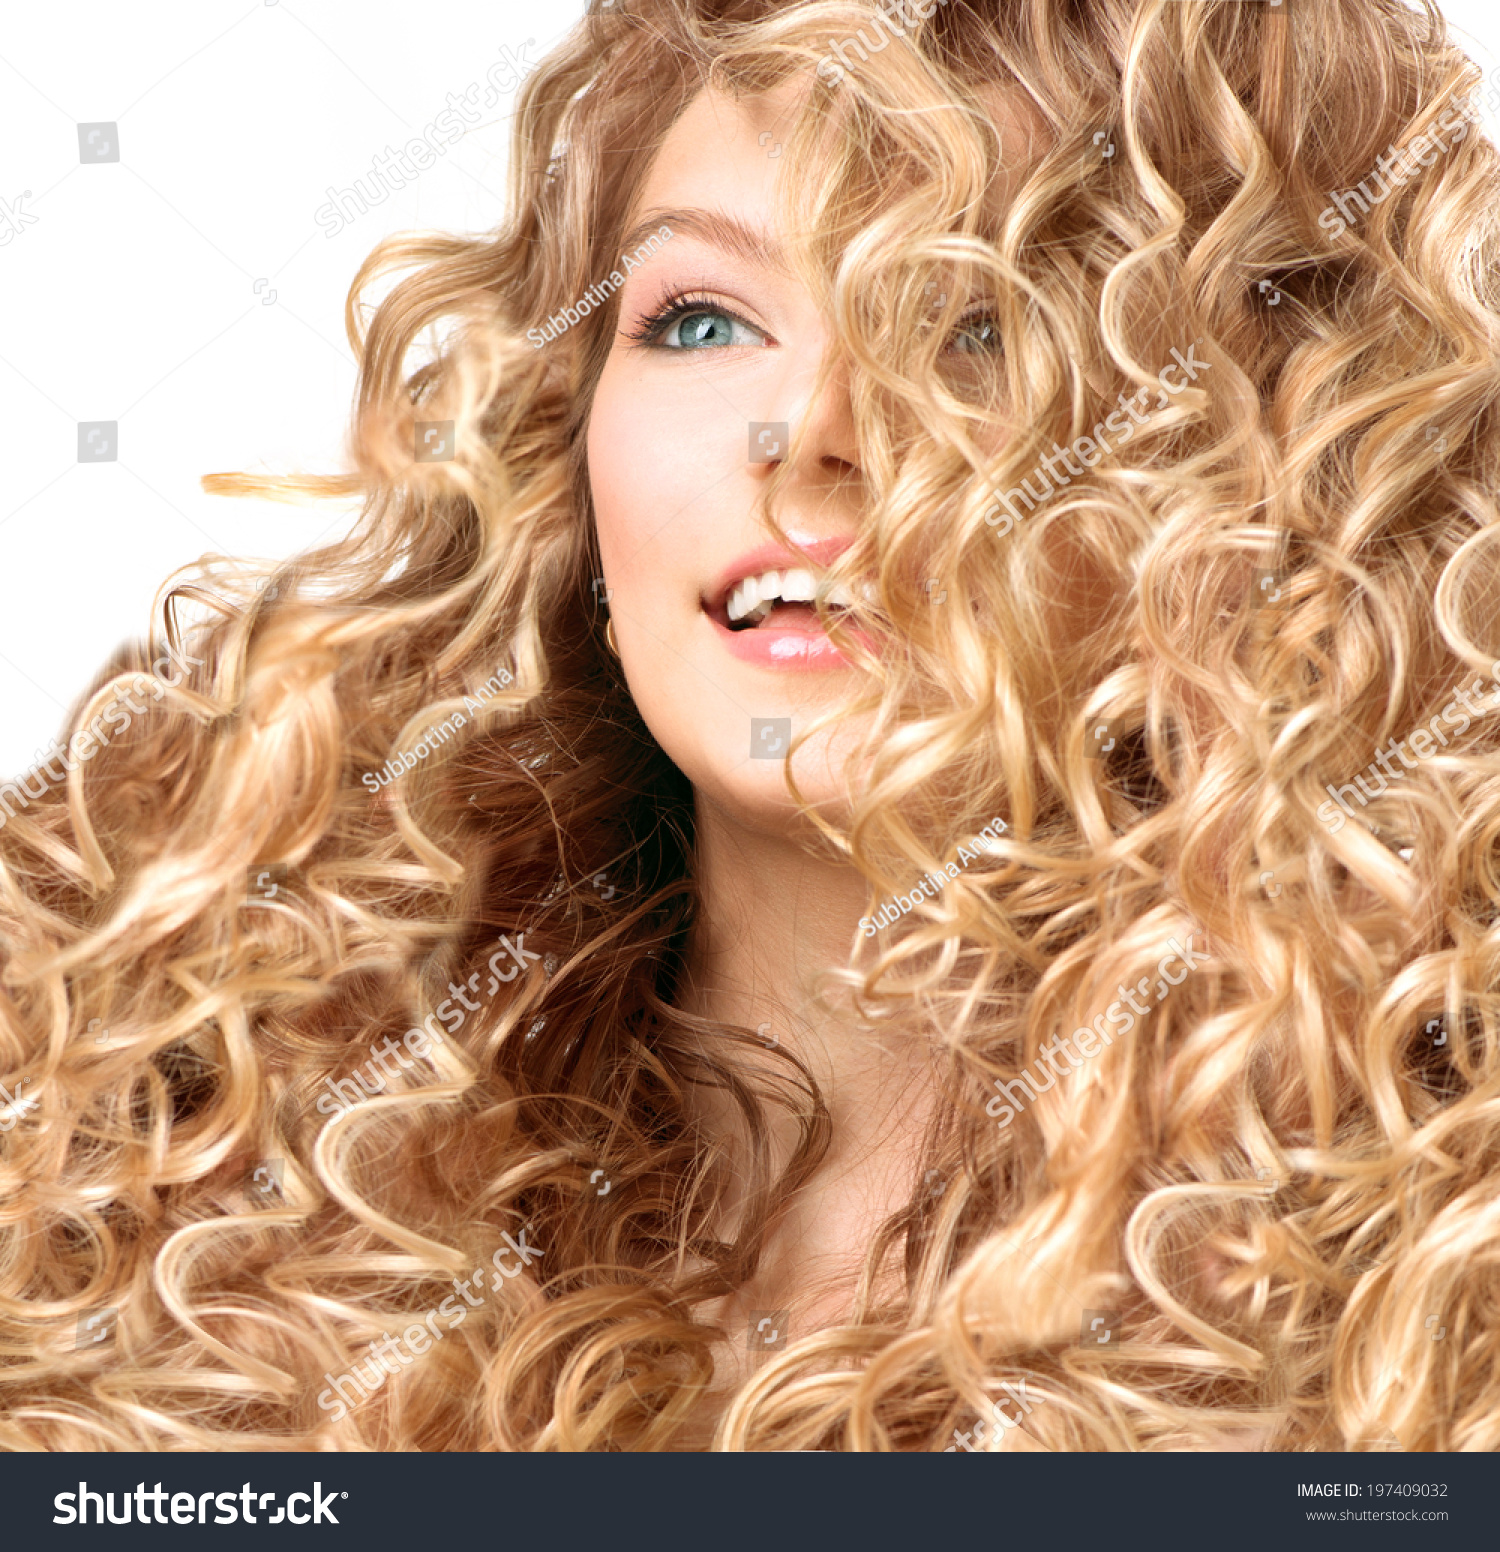 41 Hq Photos Blonde Curl Hair 50 Natural Curly Hairstyles Curly Hair Ideas To Try In 2020 Hair